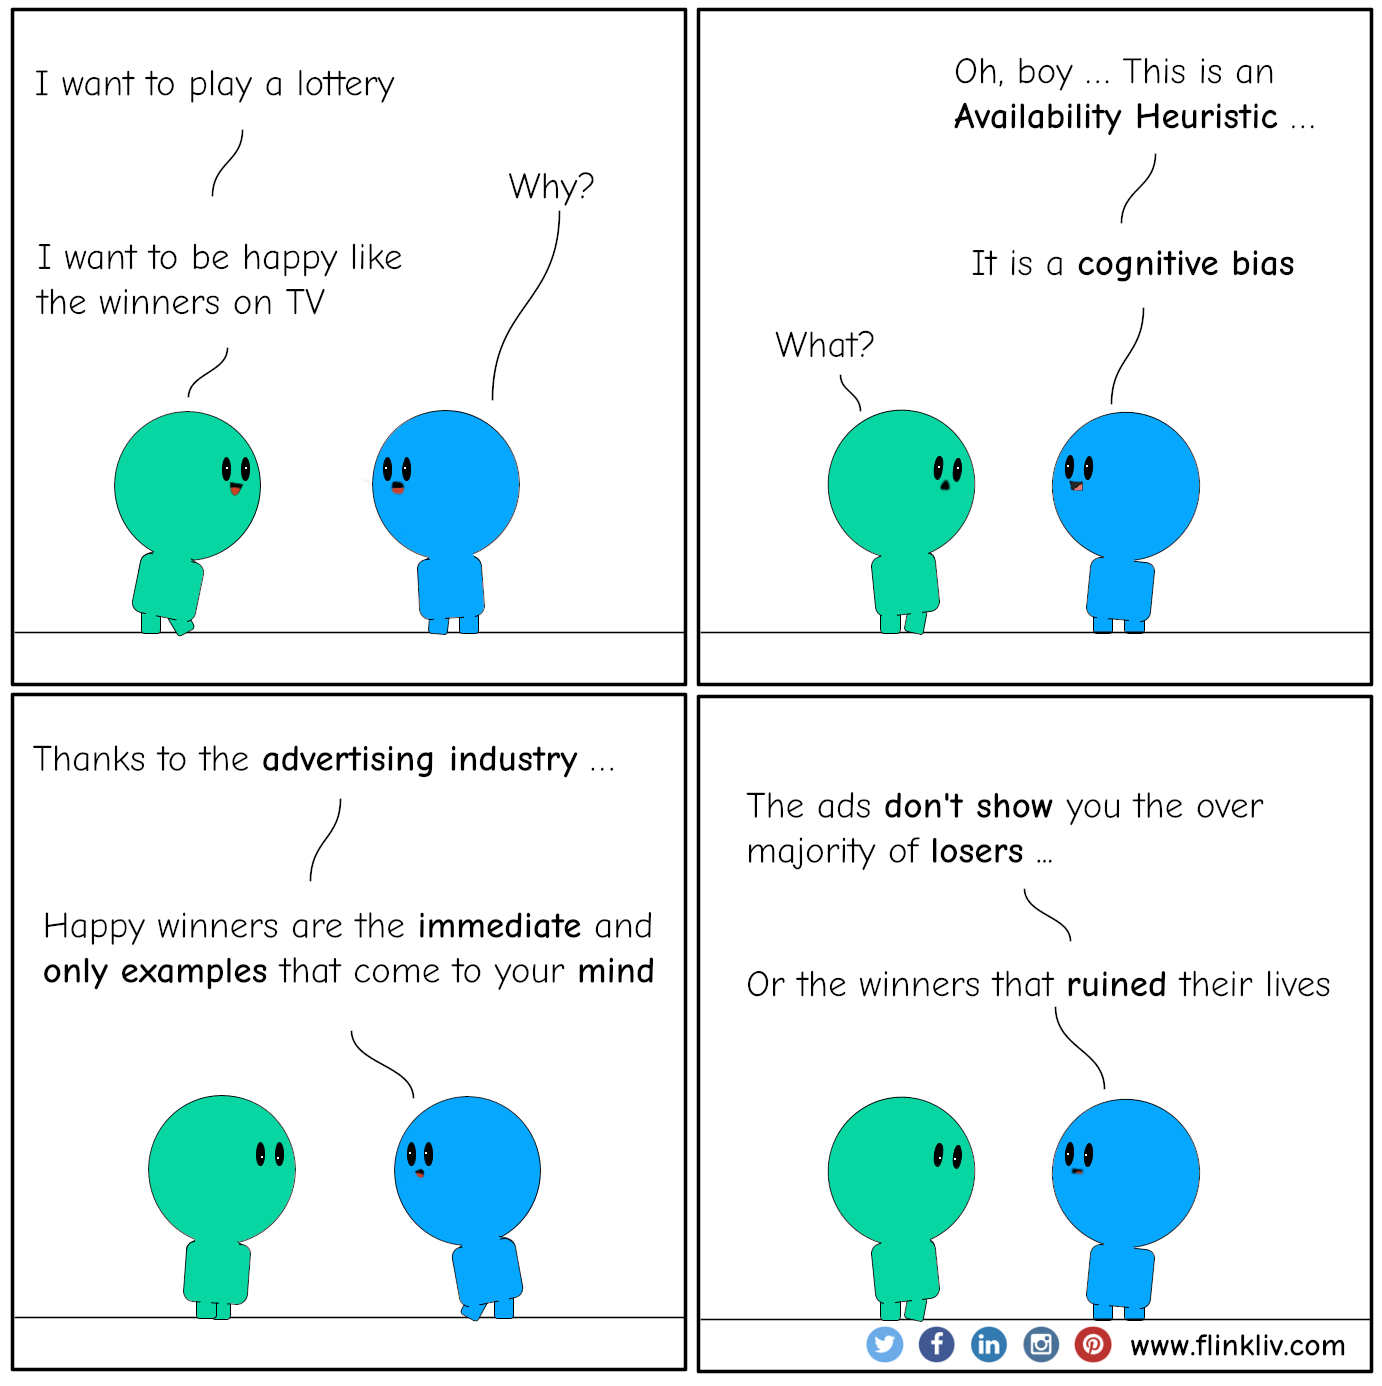 Conversation between A and B about Availability Heuristic. A: I want to play a lottery B: Why? A: I want to be happy like the winners on TV B: Oh, boy. This is an Availability Heuristic; it is a cognitive bias A: What? B: Thanks to the advertising industry, happy winners are the immediate and only examples that come to your mind B: The ads don't show you the over majority of losers. Or the winners that ruined their lives.
				By Flinkliv.com